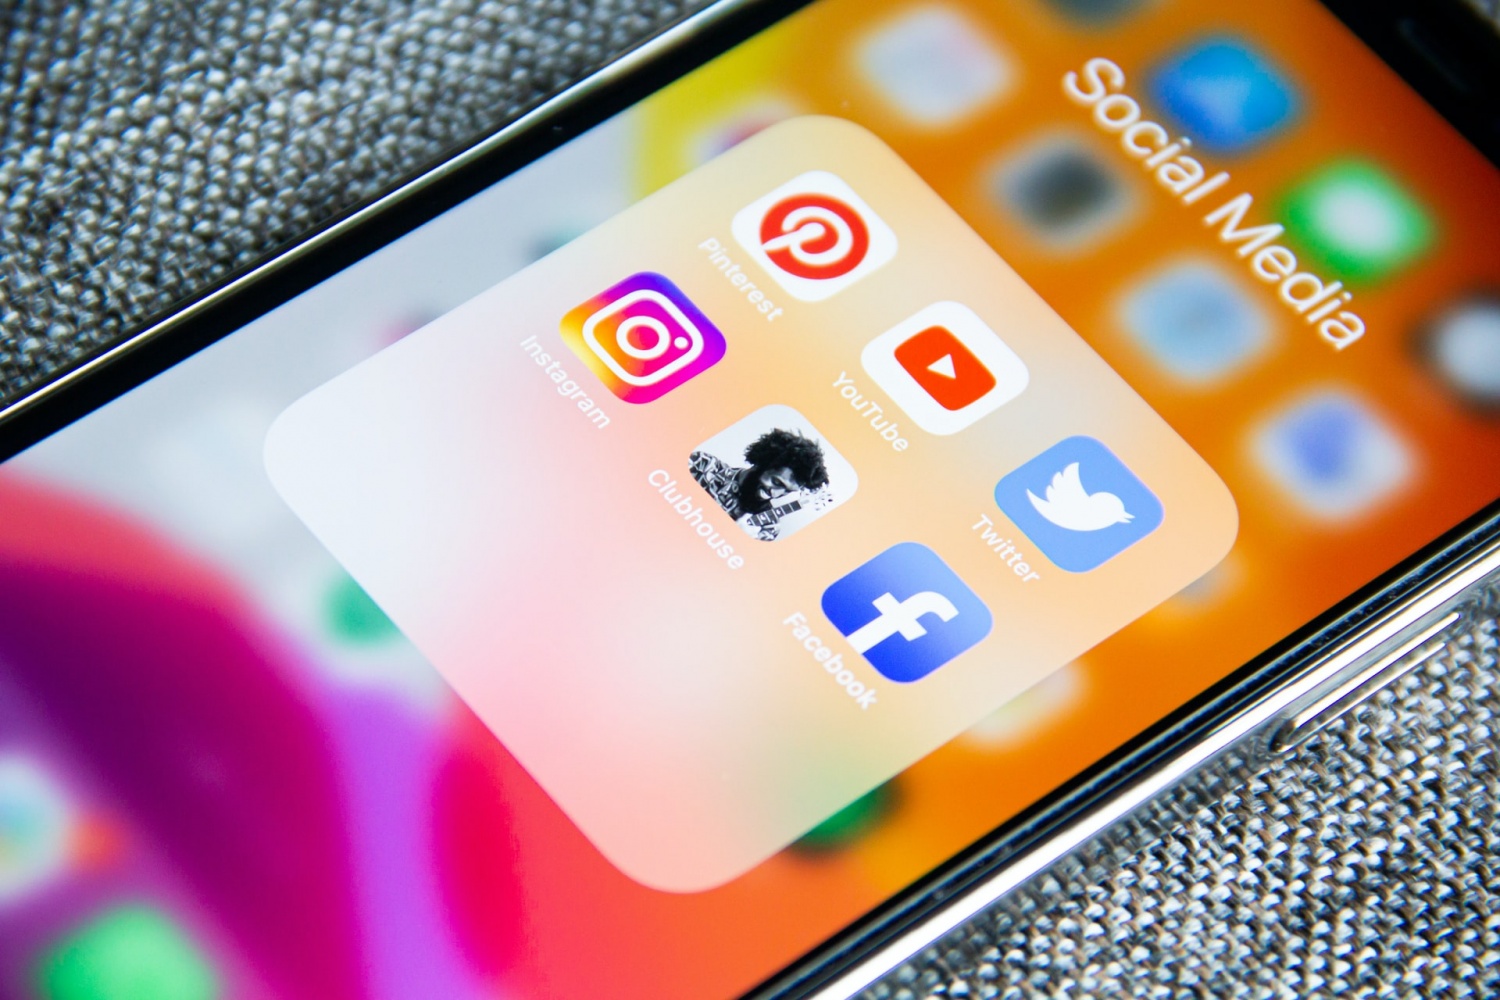 Facebook 'Scare Tactic' Rolls Out After Apple Privacy Update: 'Help Keep Instagram/Facebook Free of Charge'